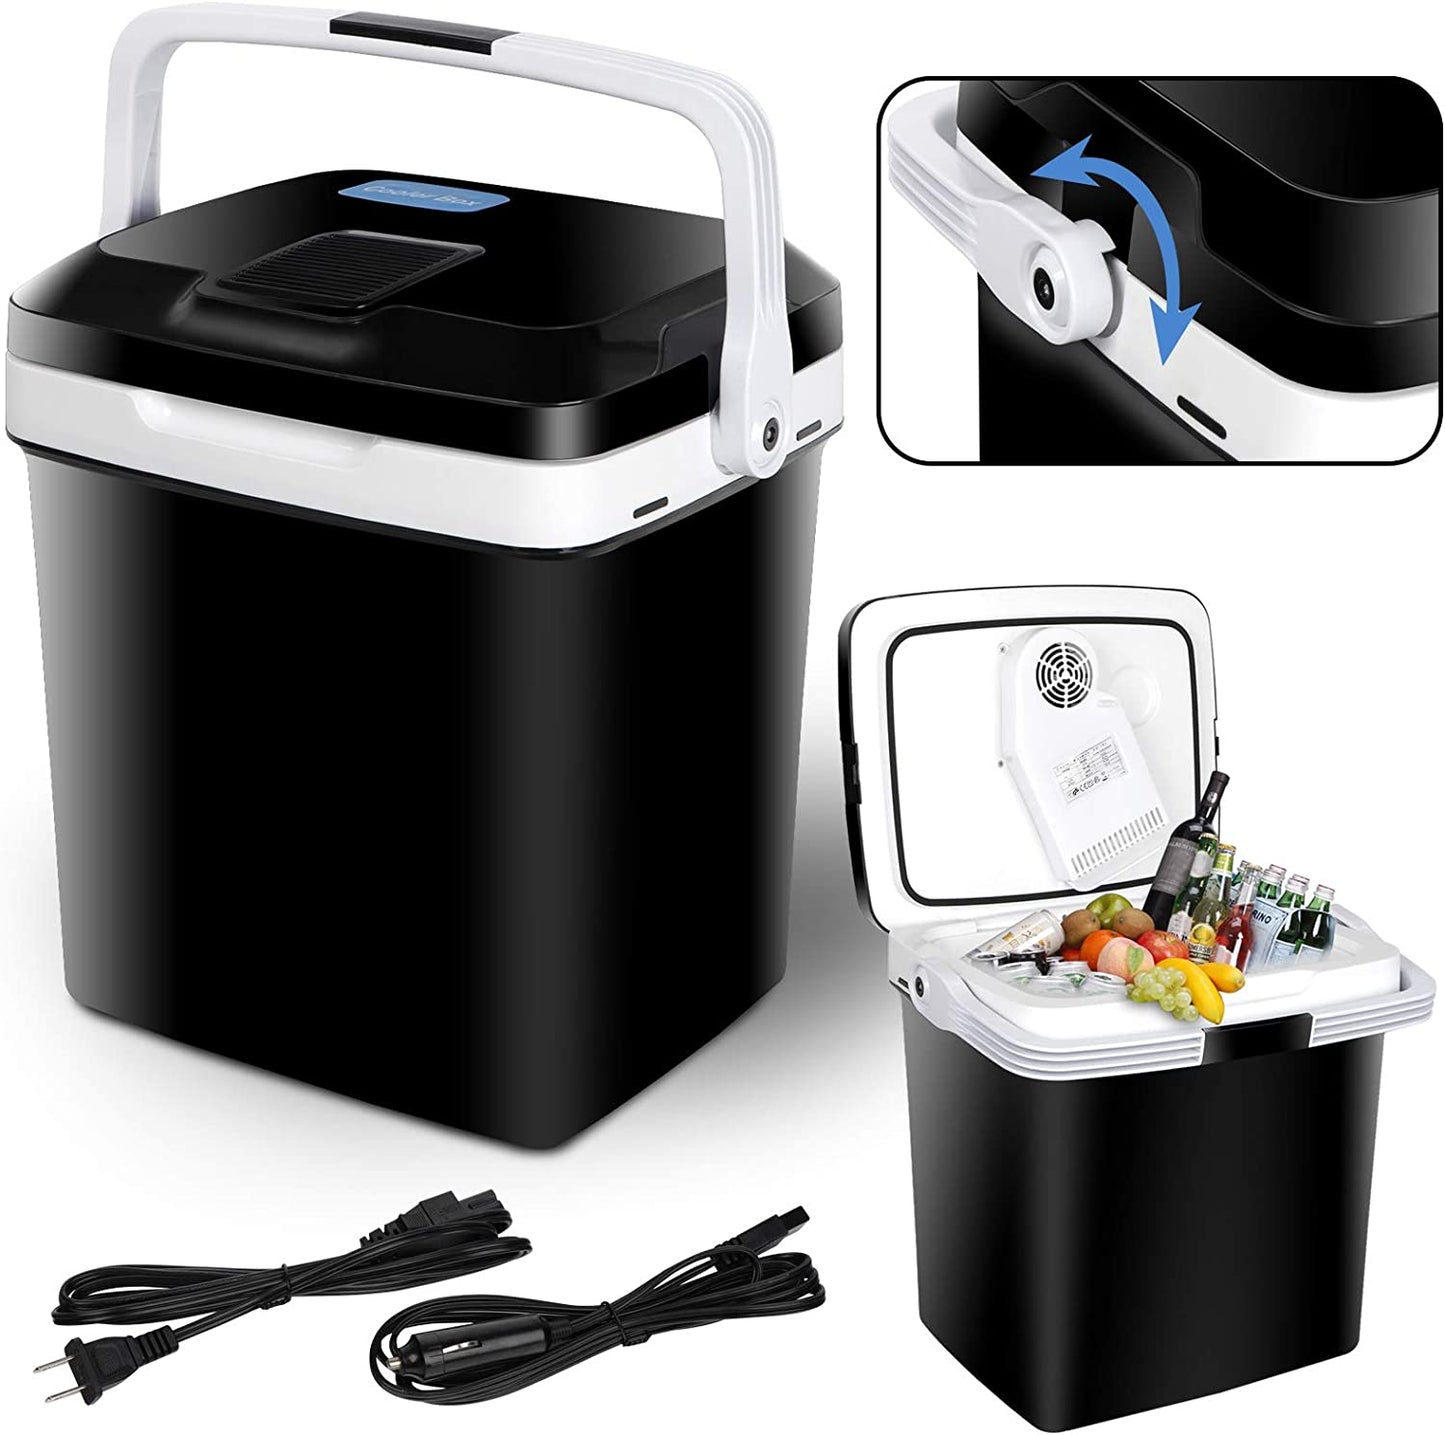 Mini Fridge Electric Cooler and Warmer for Car- 12V DC Electric Cooler Car Refrigerator with Automatic Locking Handle, 28 Quart Portable Car Fridge for Travel and Camping